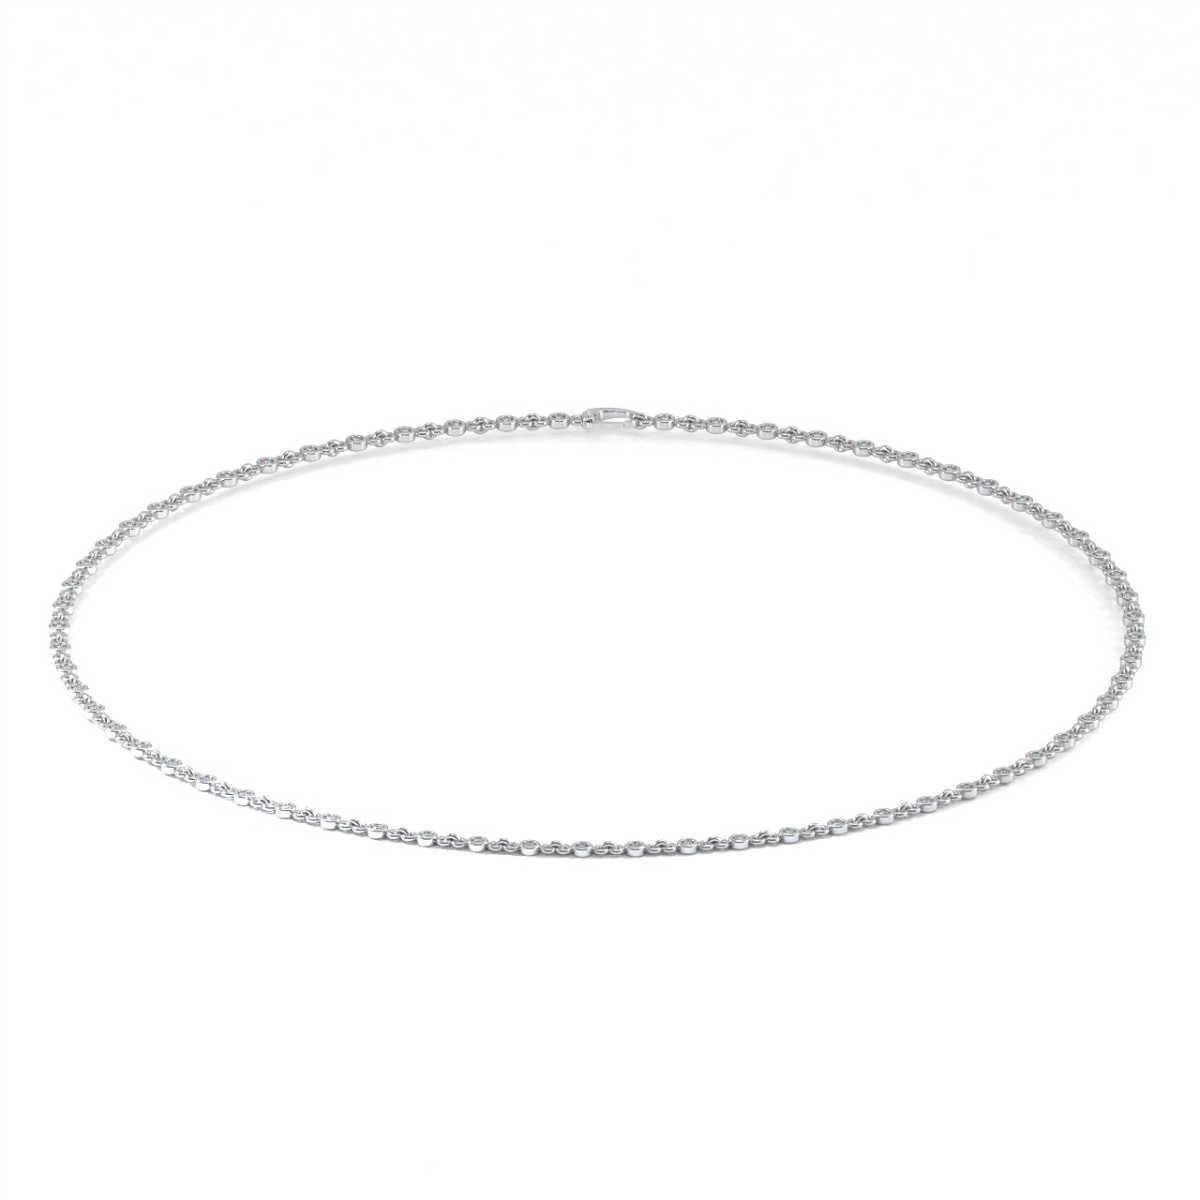 This delicate classic necklace features sixty-three ( 63) round brilliant diamonds bezel set evenly stationed along the chain. Experience the difference!

Product details: 

Center Gemstone Type: NATURAL DIAMOND
Center Gemstone Color: WHITE
Center